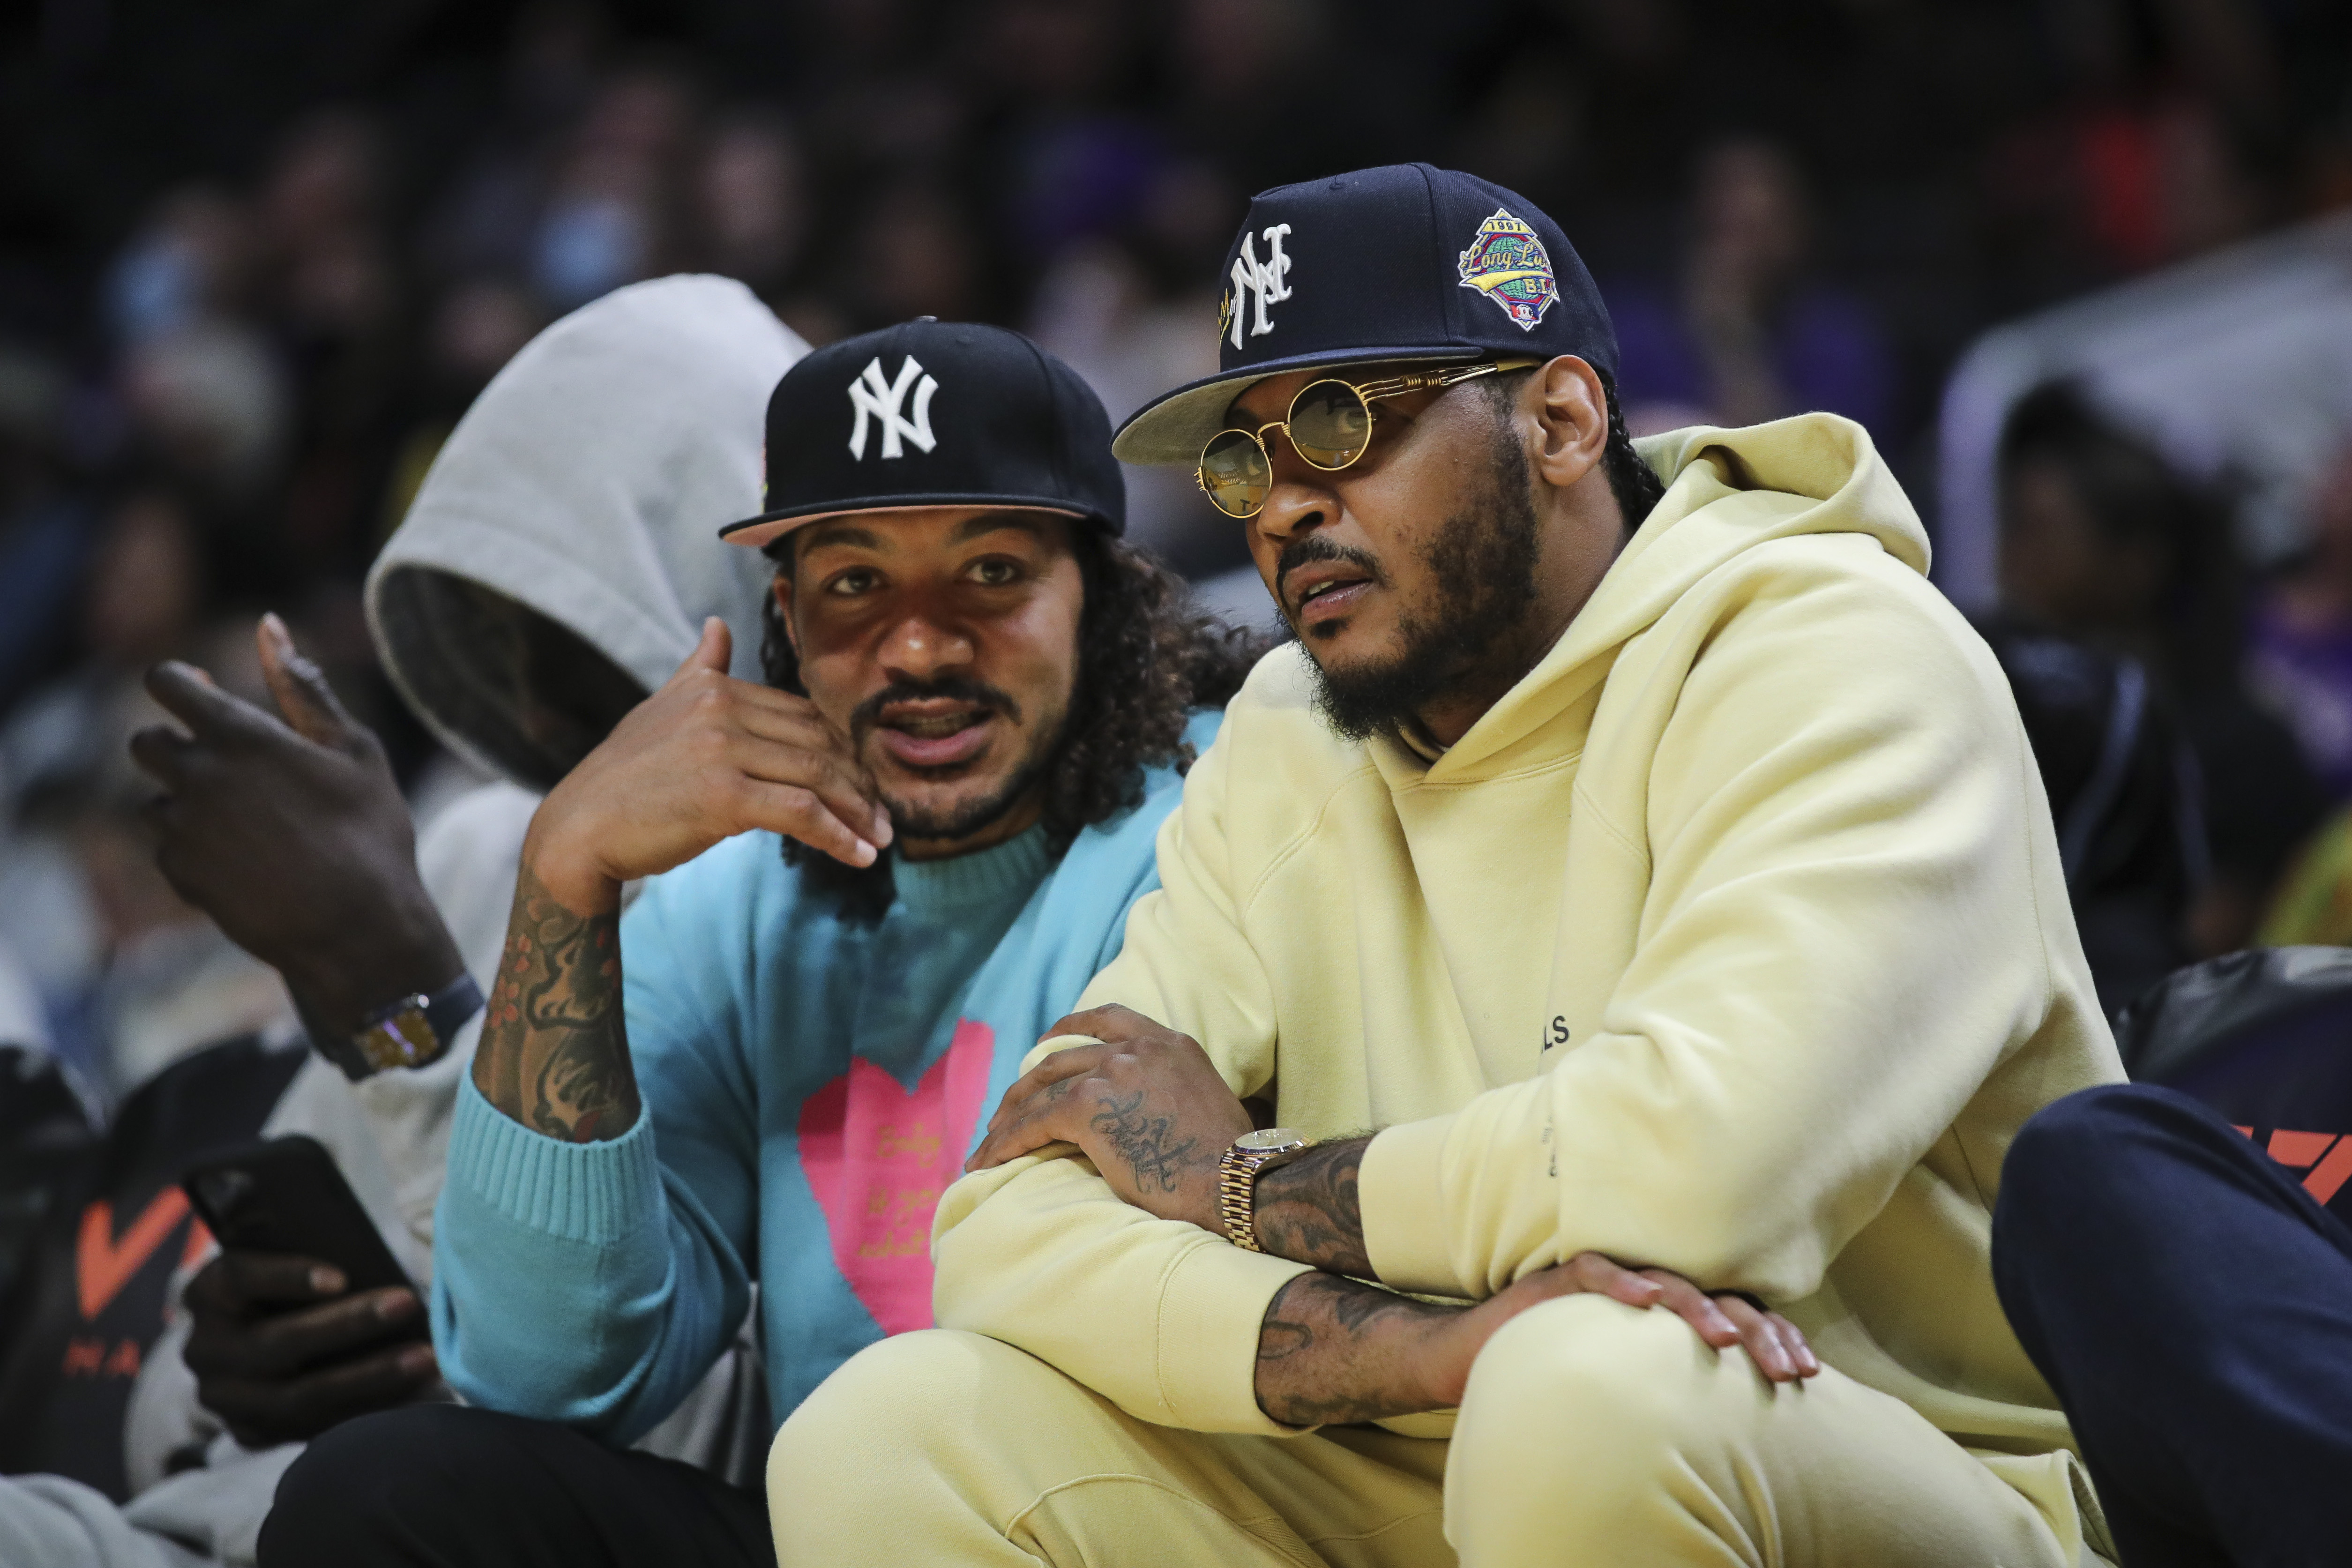 Carmelo Anthony's Son Appears To Be On Notable Recruiting Visit